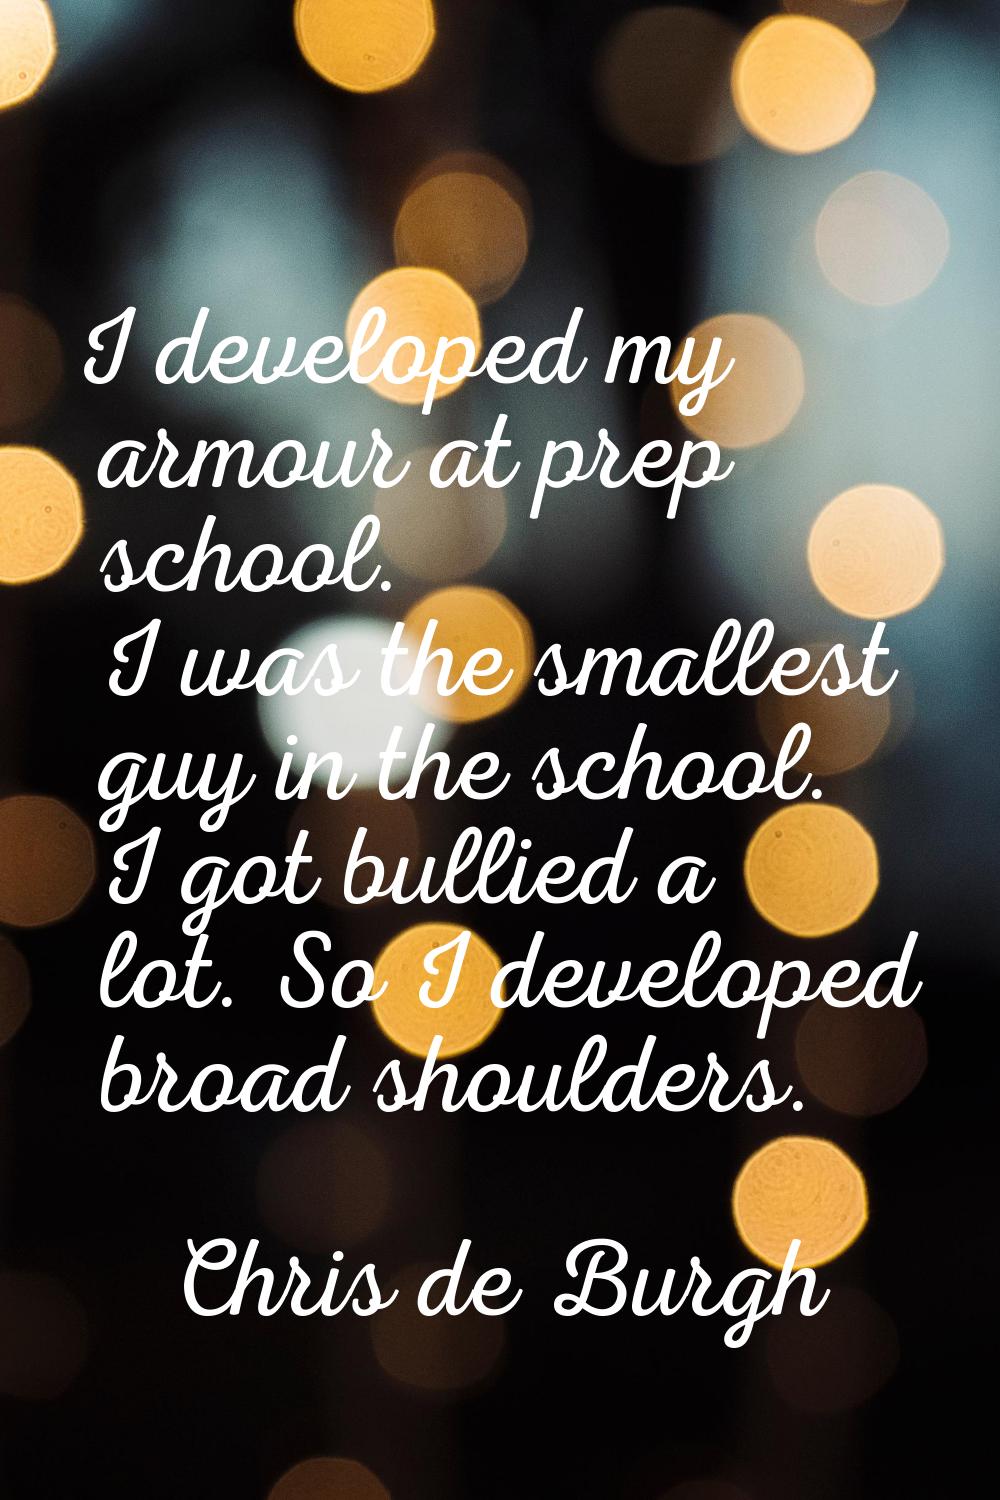 I developed my armour at prep school. I was the smallest guy in the school. I got bullied a lot. So